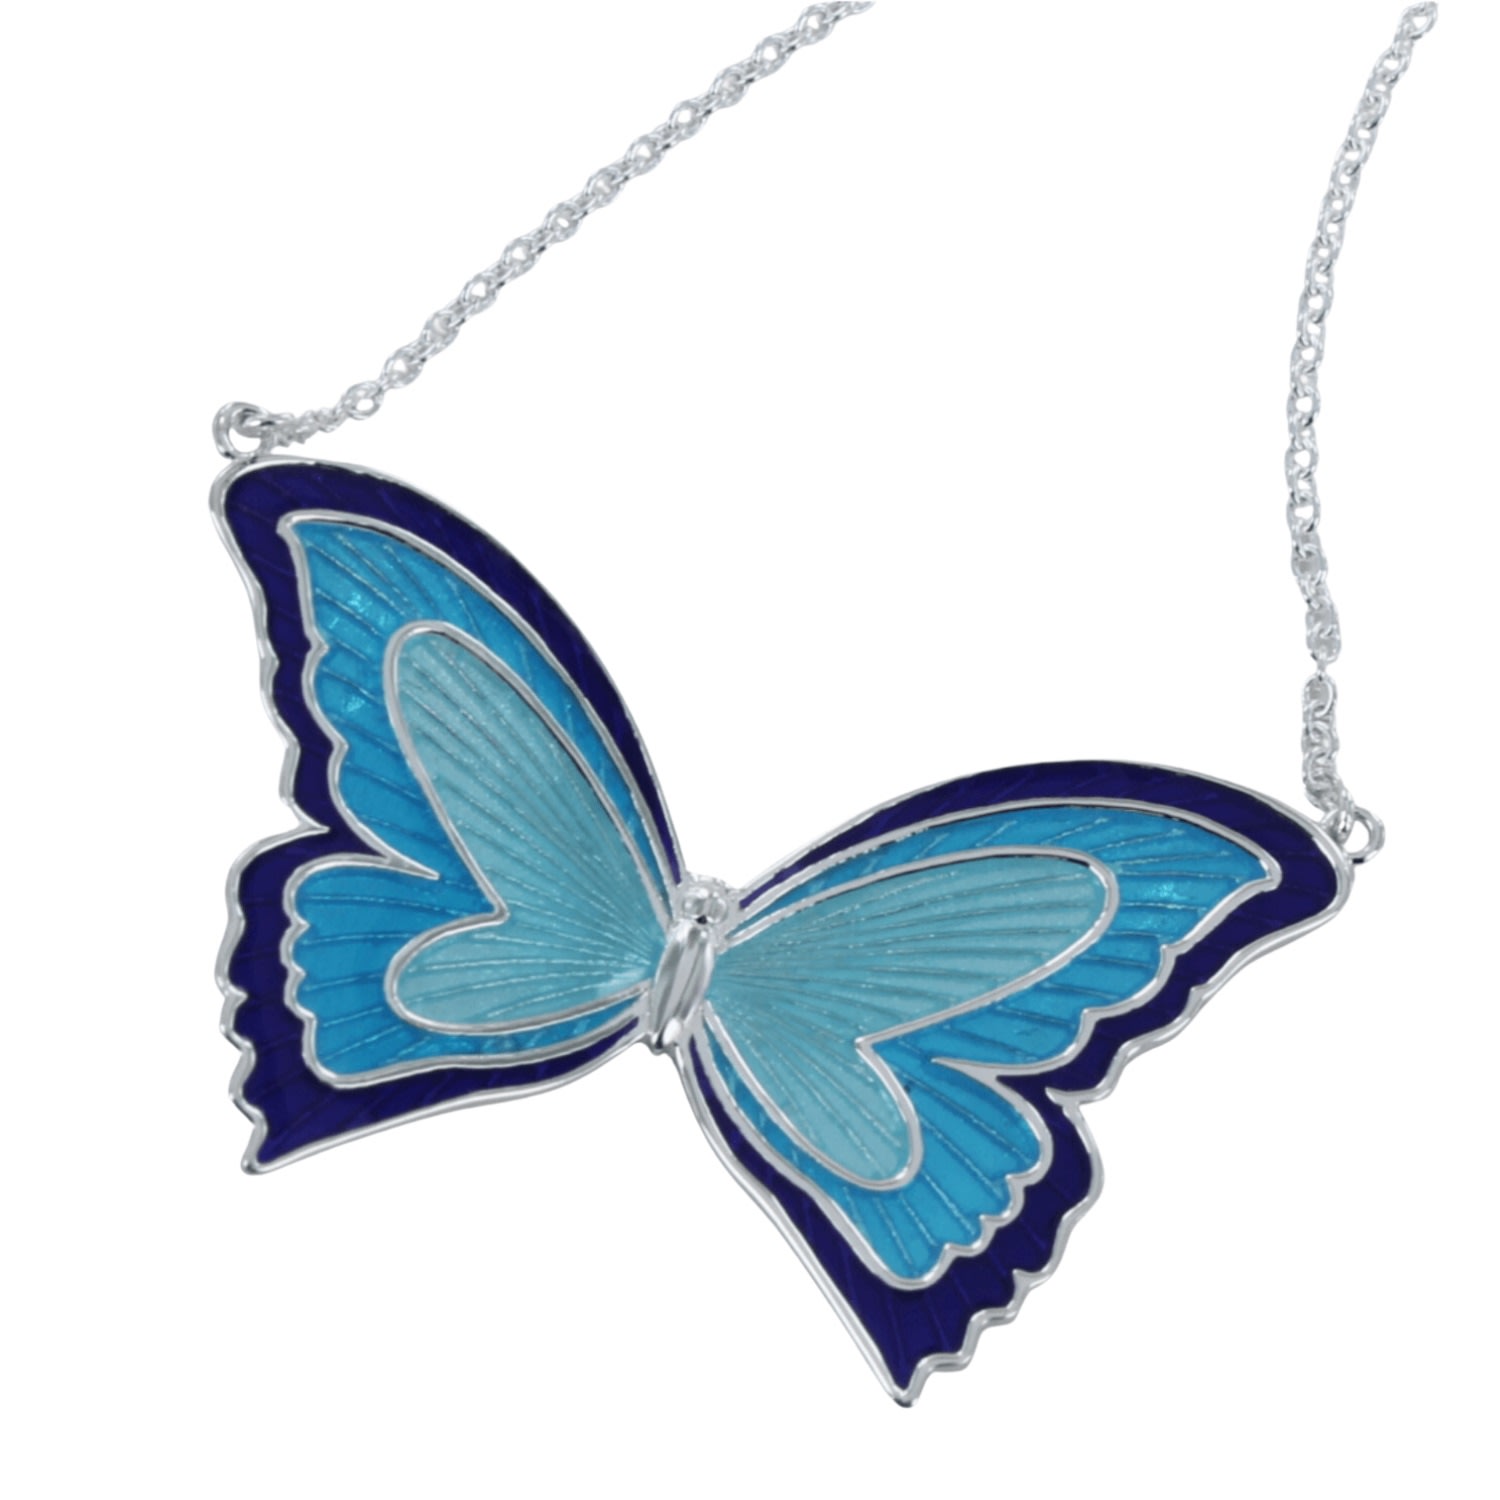 Women’s Silver / Blue Large Enamel Butterfly Necklace Reeves & Reeves